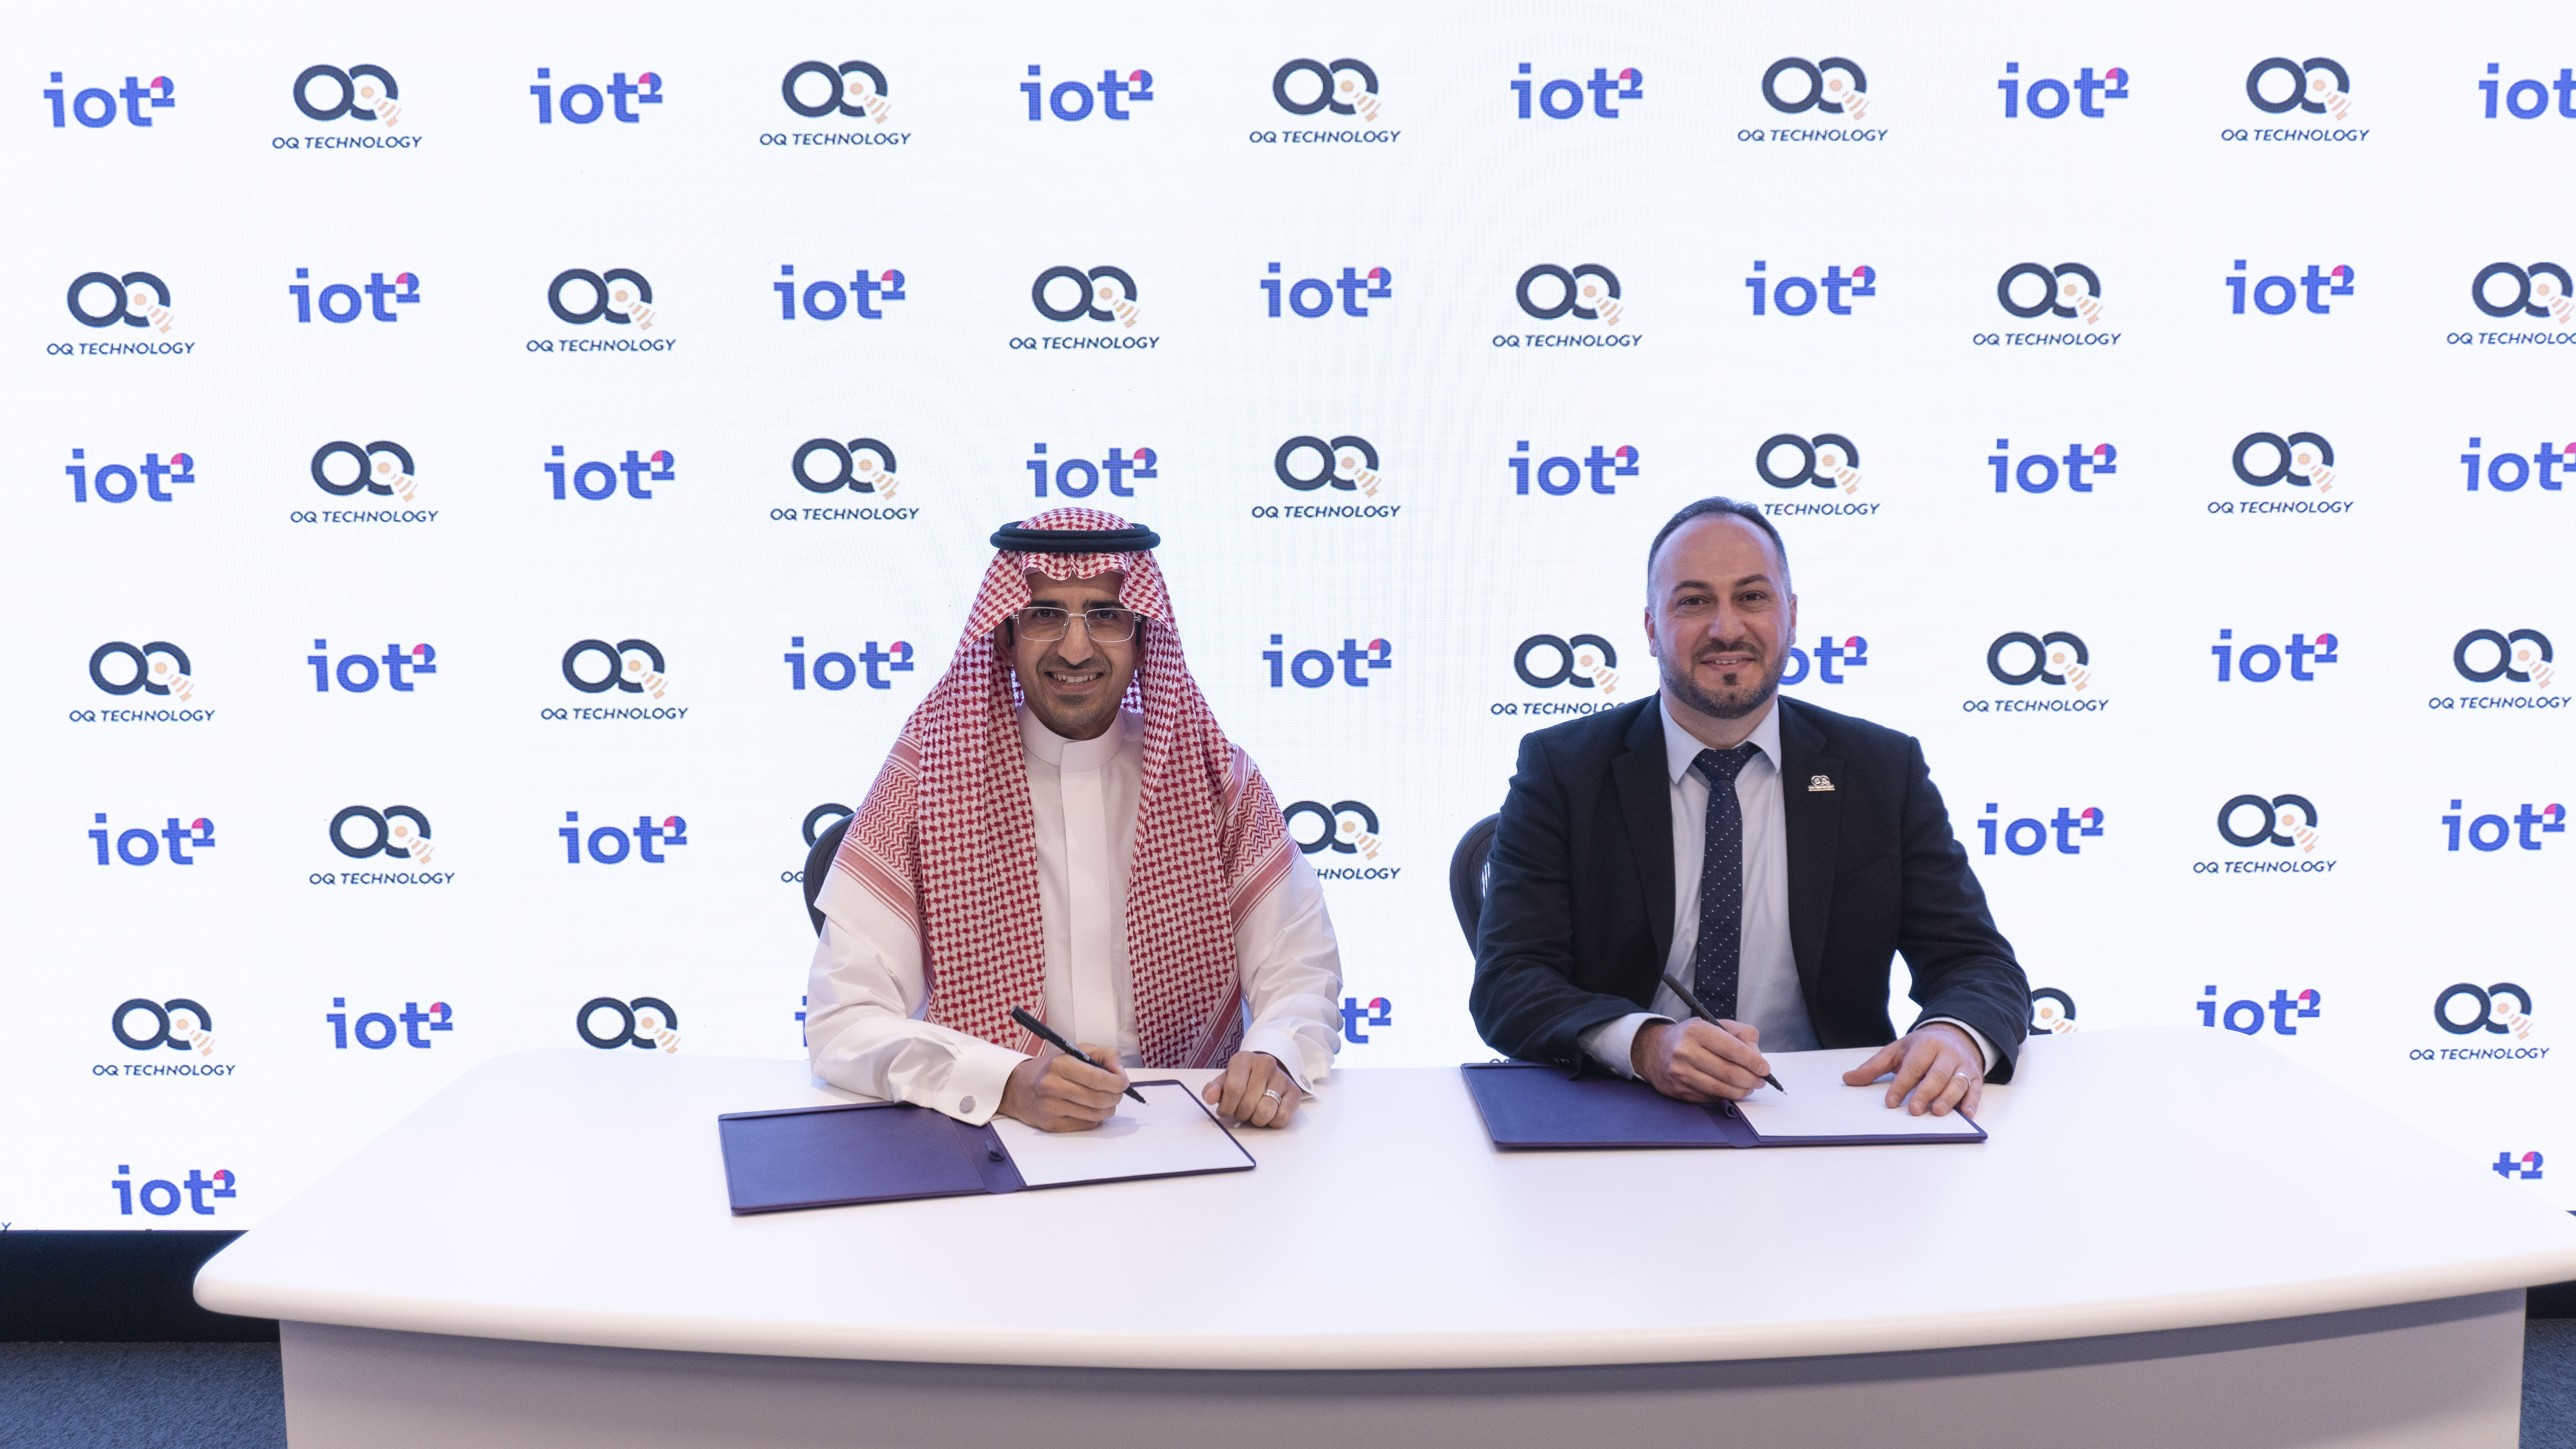 Shabbab Al Ghamdi -Public IoT Solutions VP (left), and Omar Qaise, Founder and CEO of OQ Technology (right)